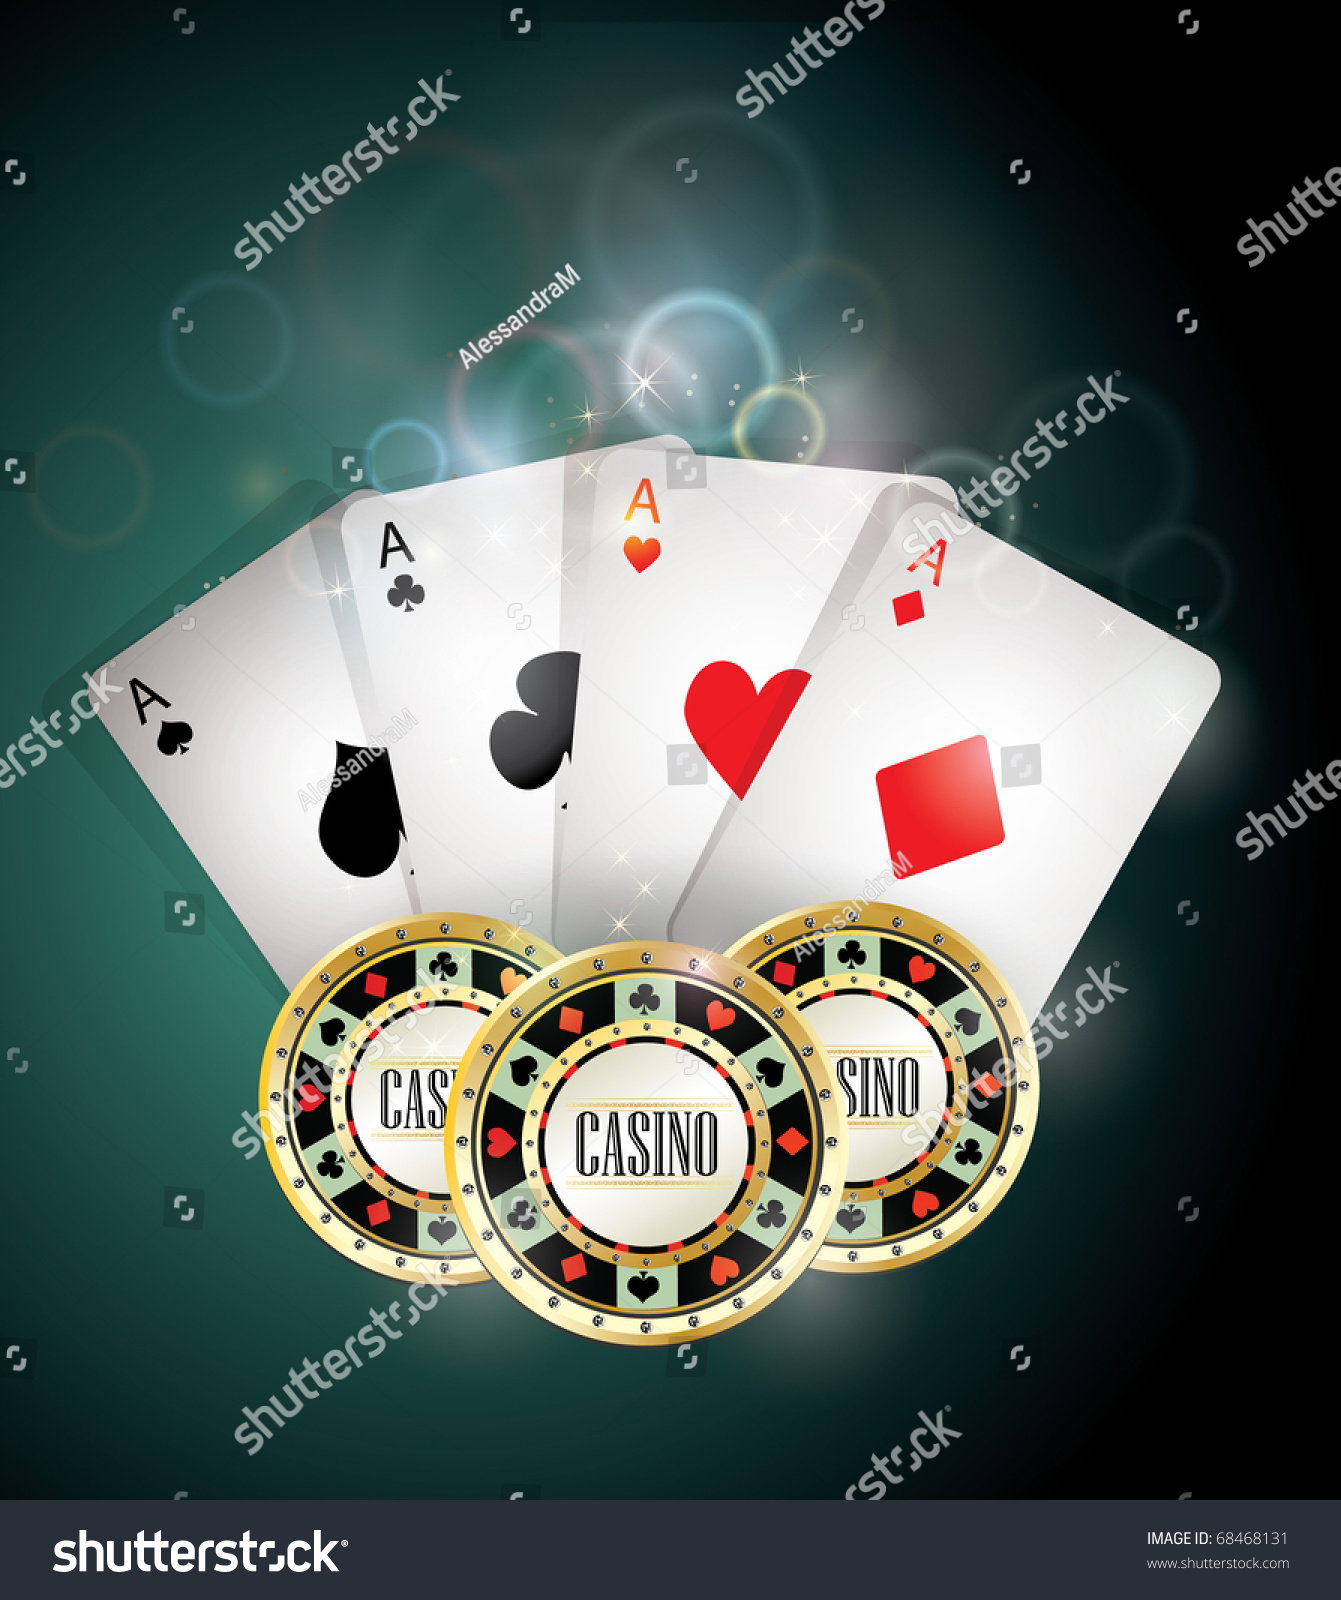 Casino Elements/Poker Cards And Chips Stock Vector 68468131 : Shutterstock